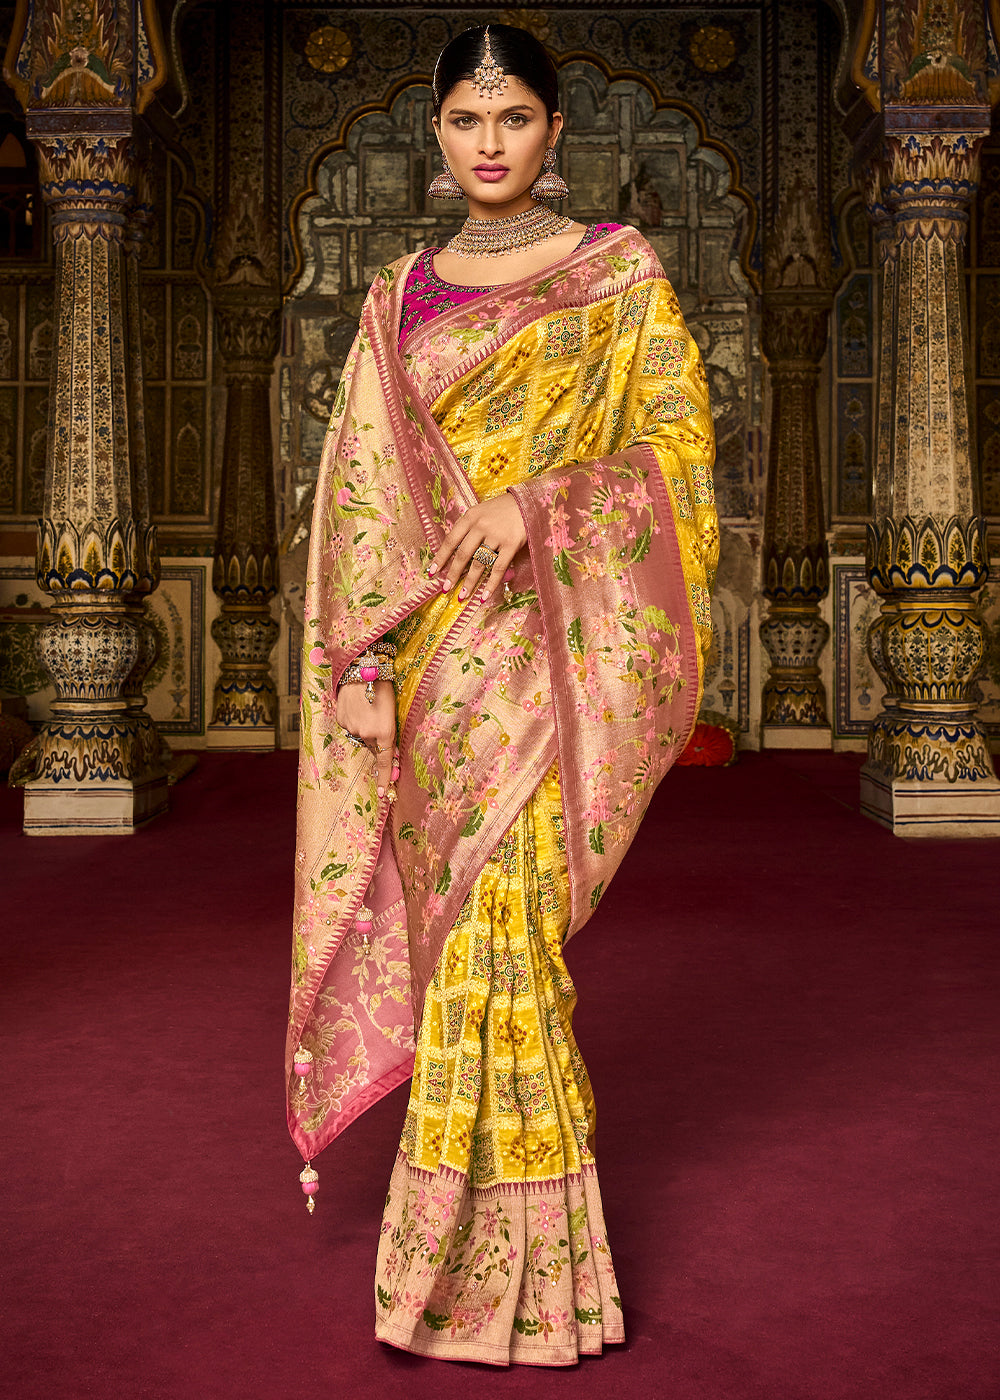 Cadmium Yellow Woven Patola Printed Dola Silk Saree with Heavy Embroidered Blouse